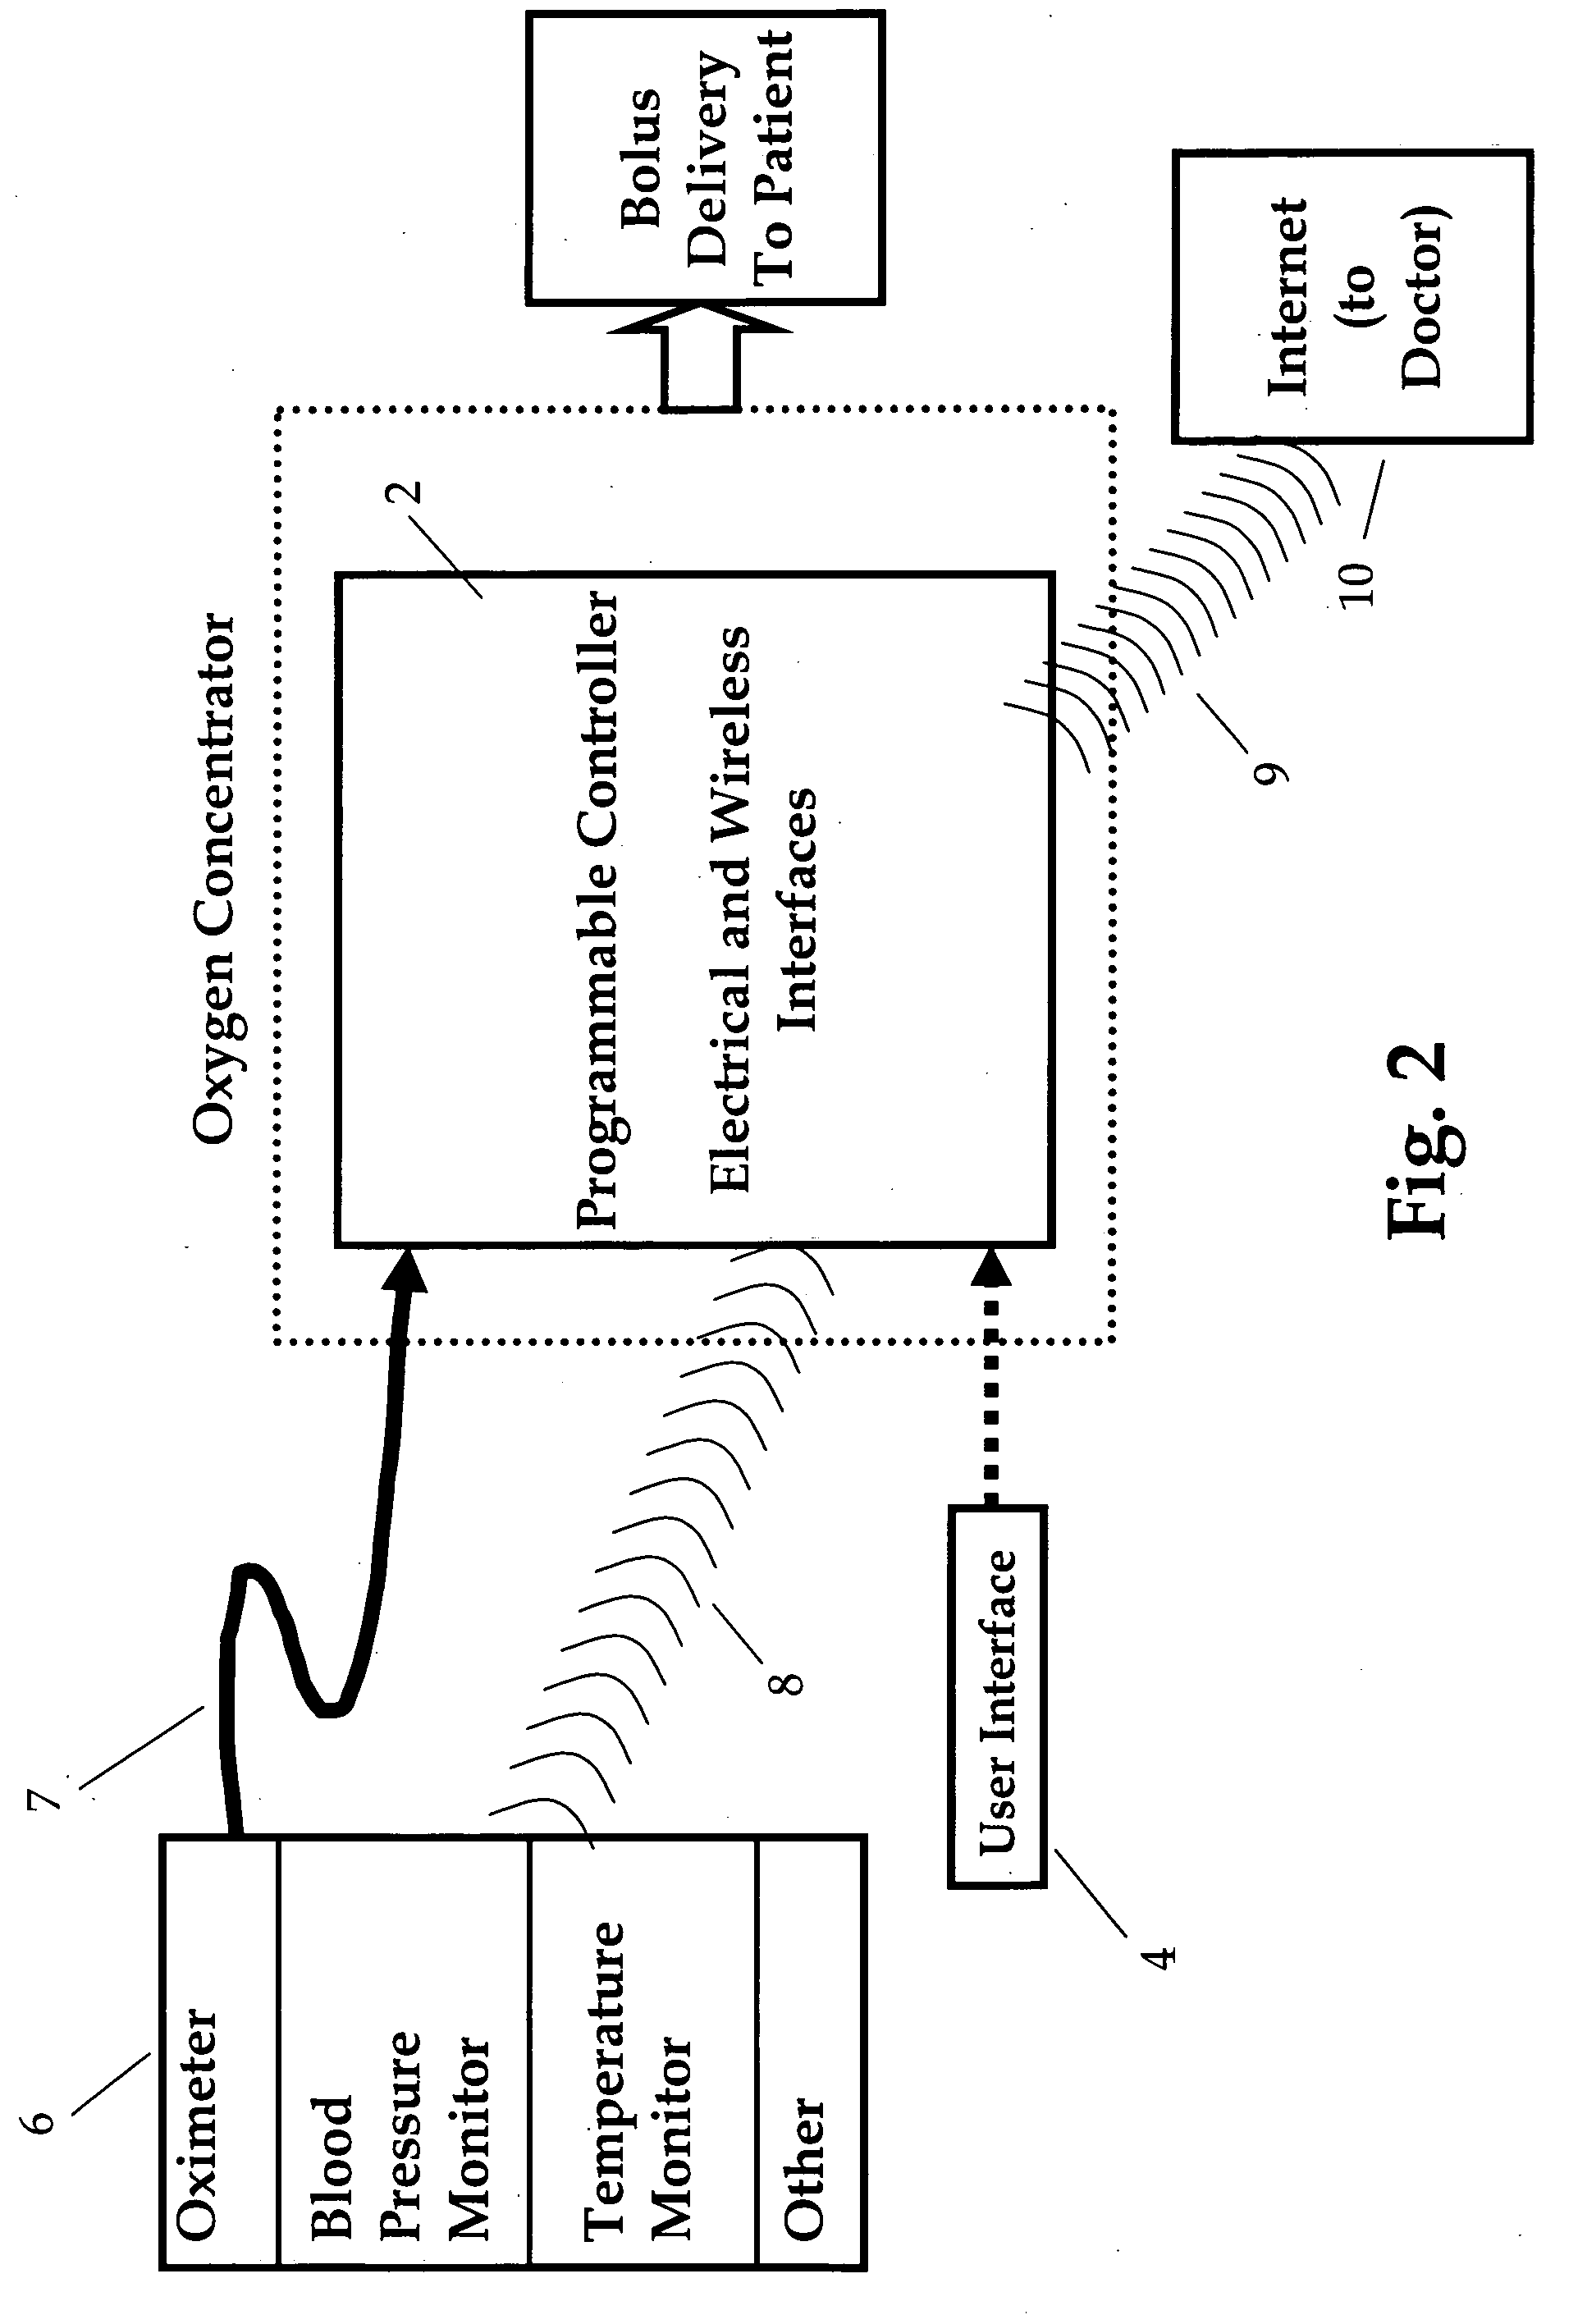 In-home medical data collection and reporting system